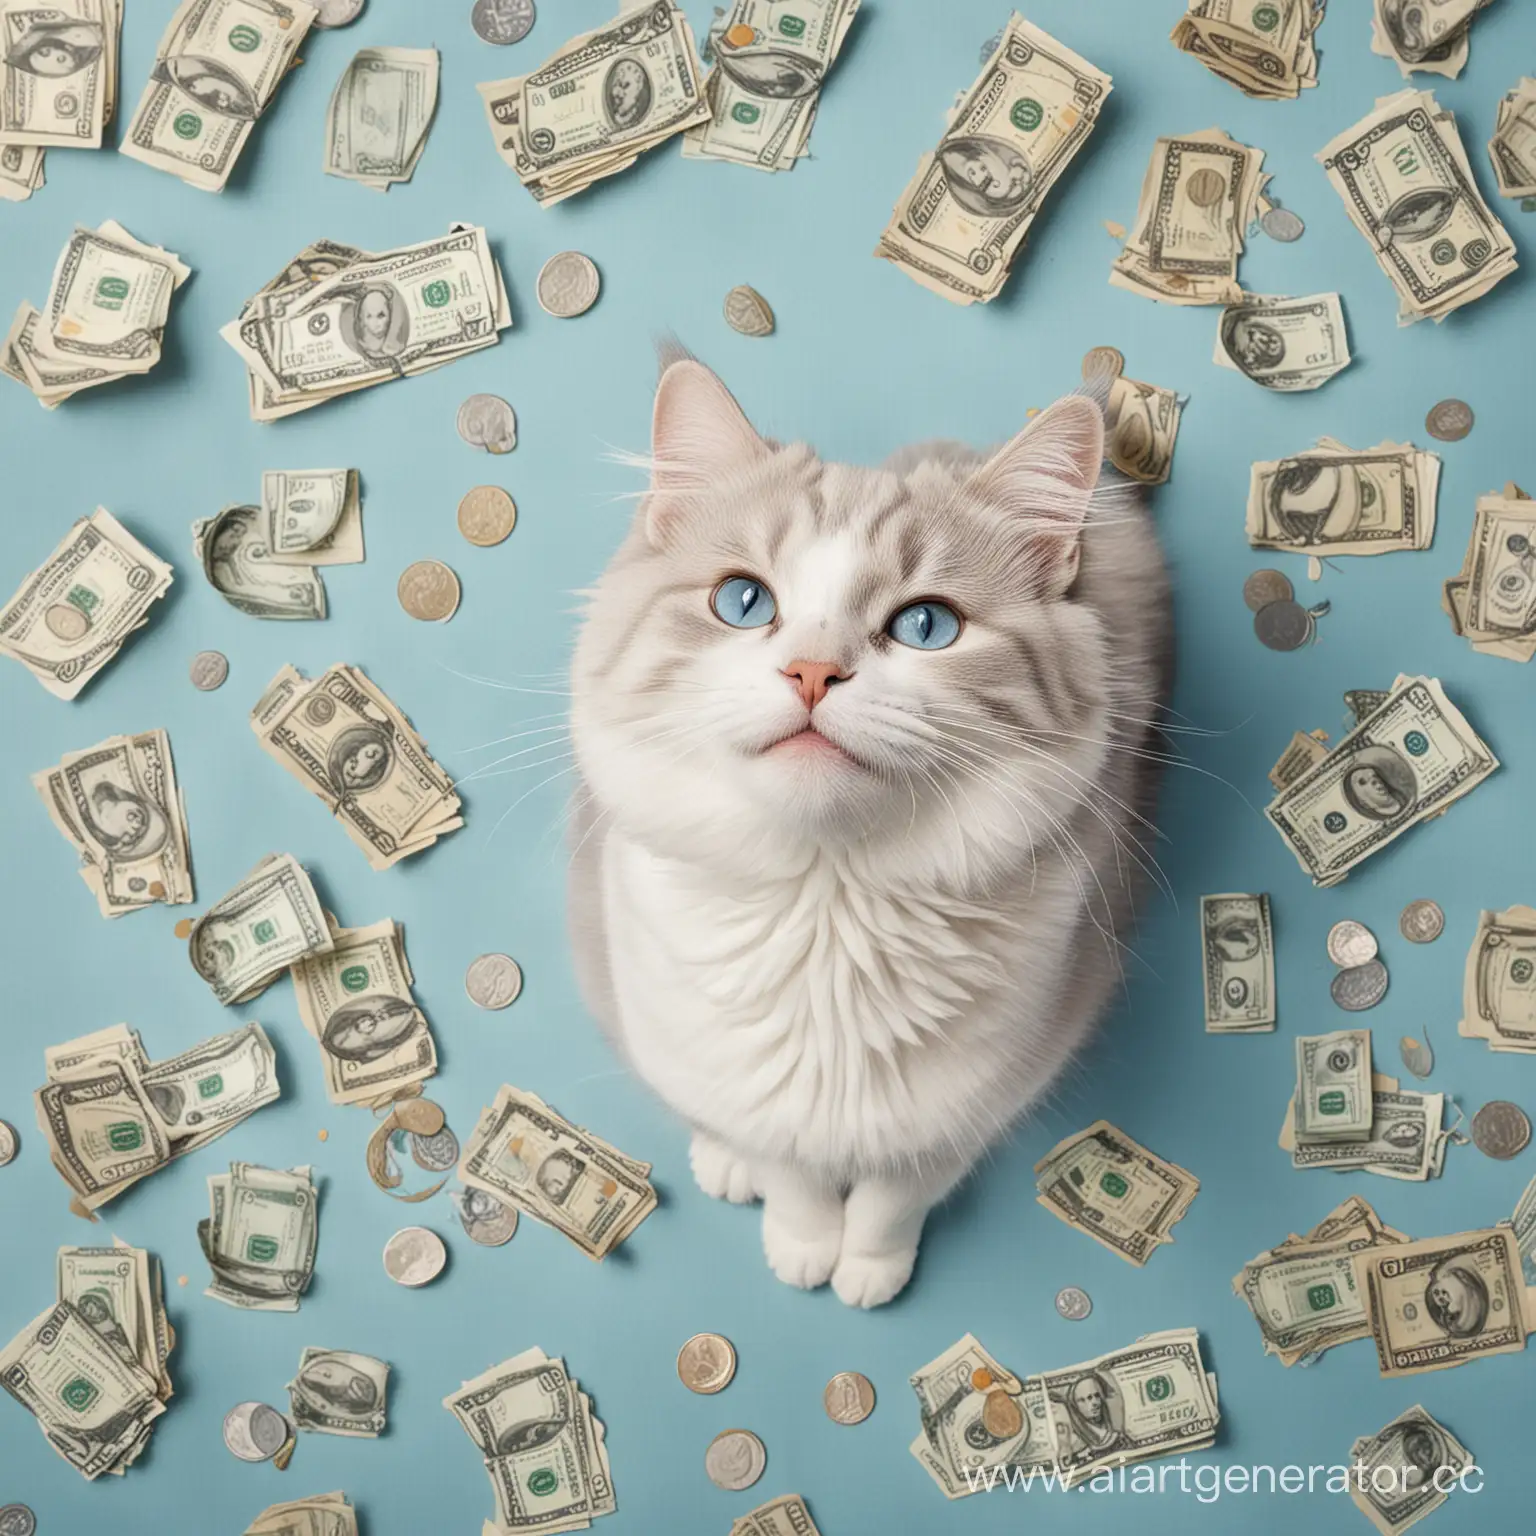 Smiling-Cat-Surrounded-by-Money-in-a-Vibrant-Spring-Blue-Background